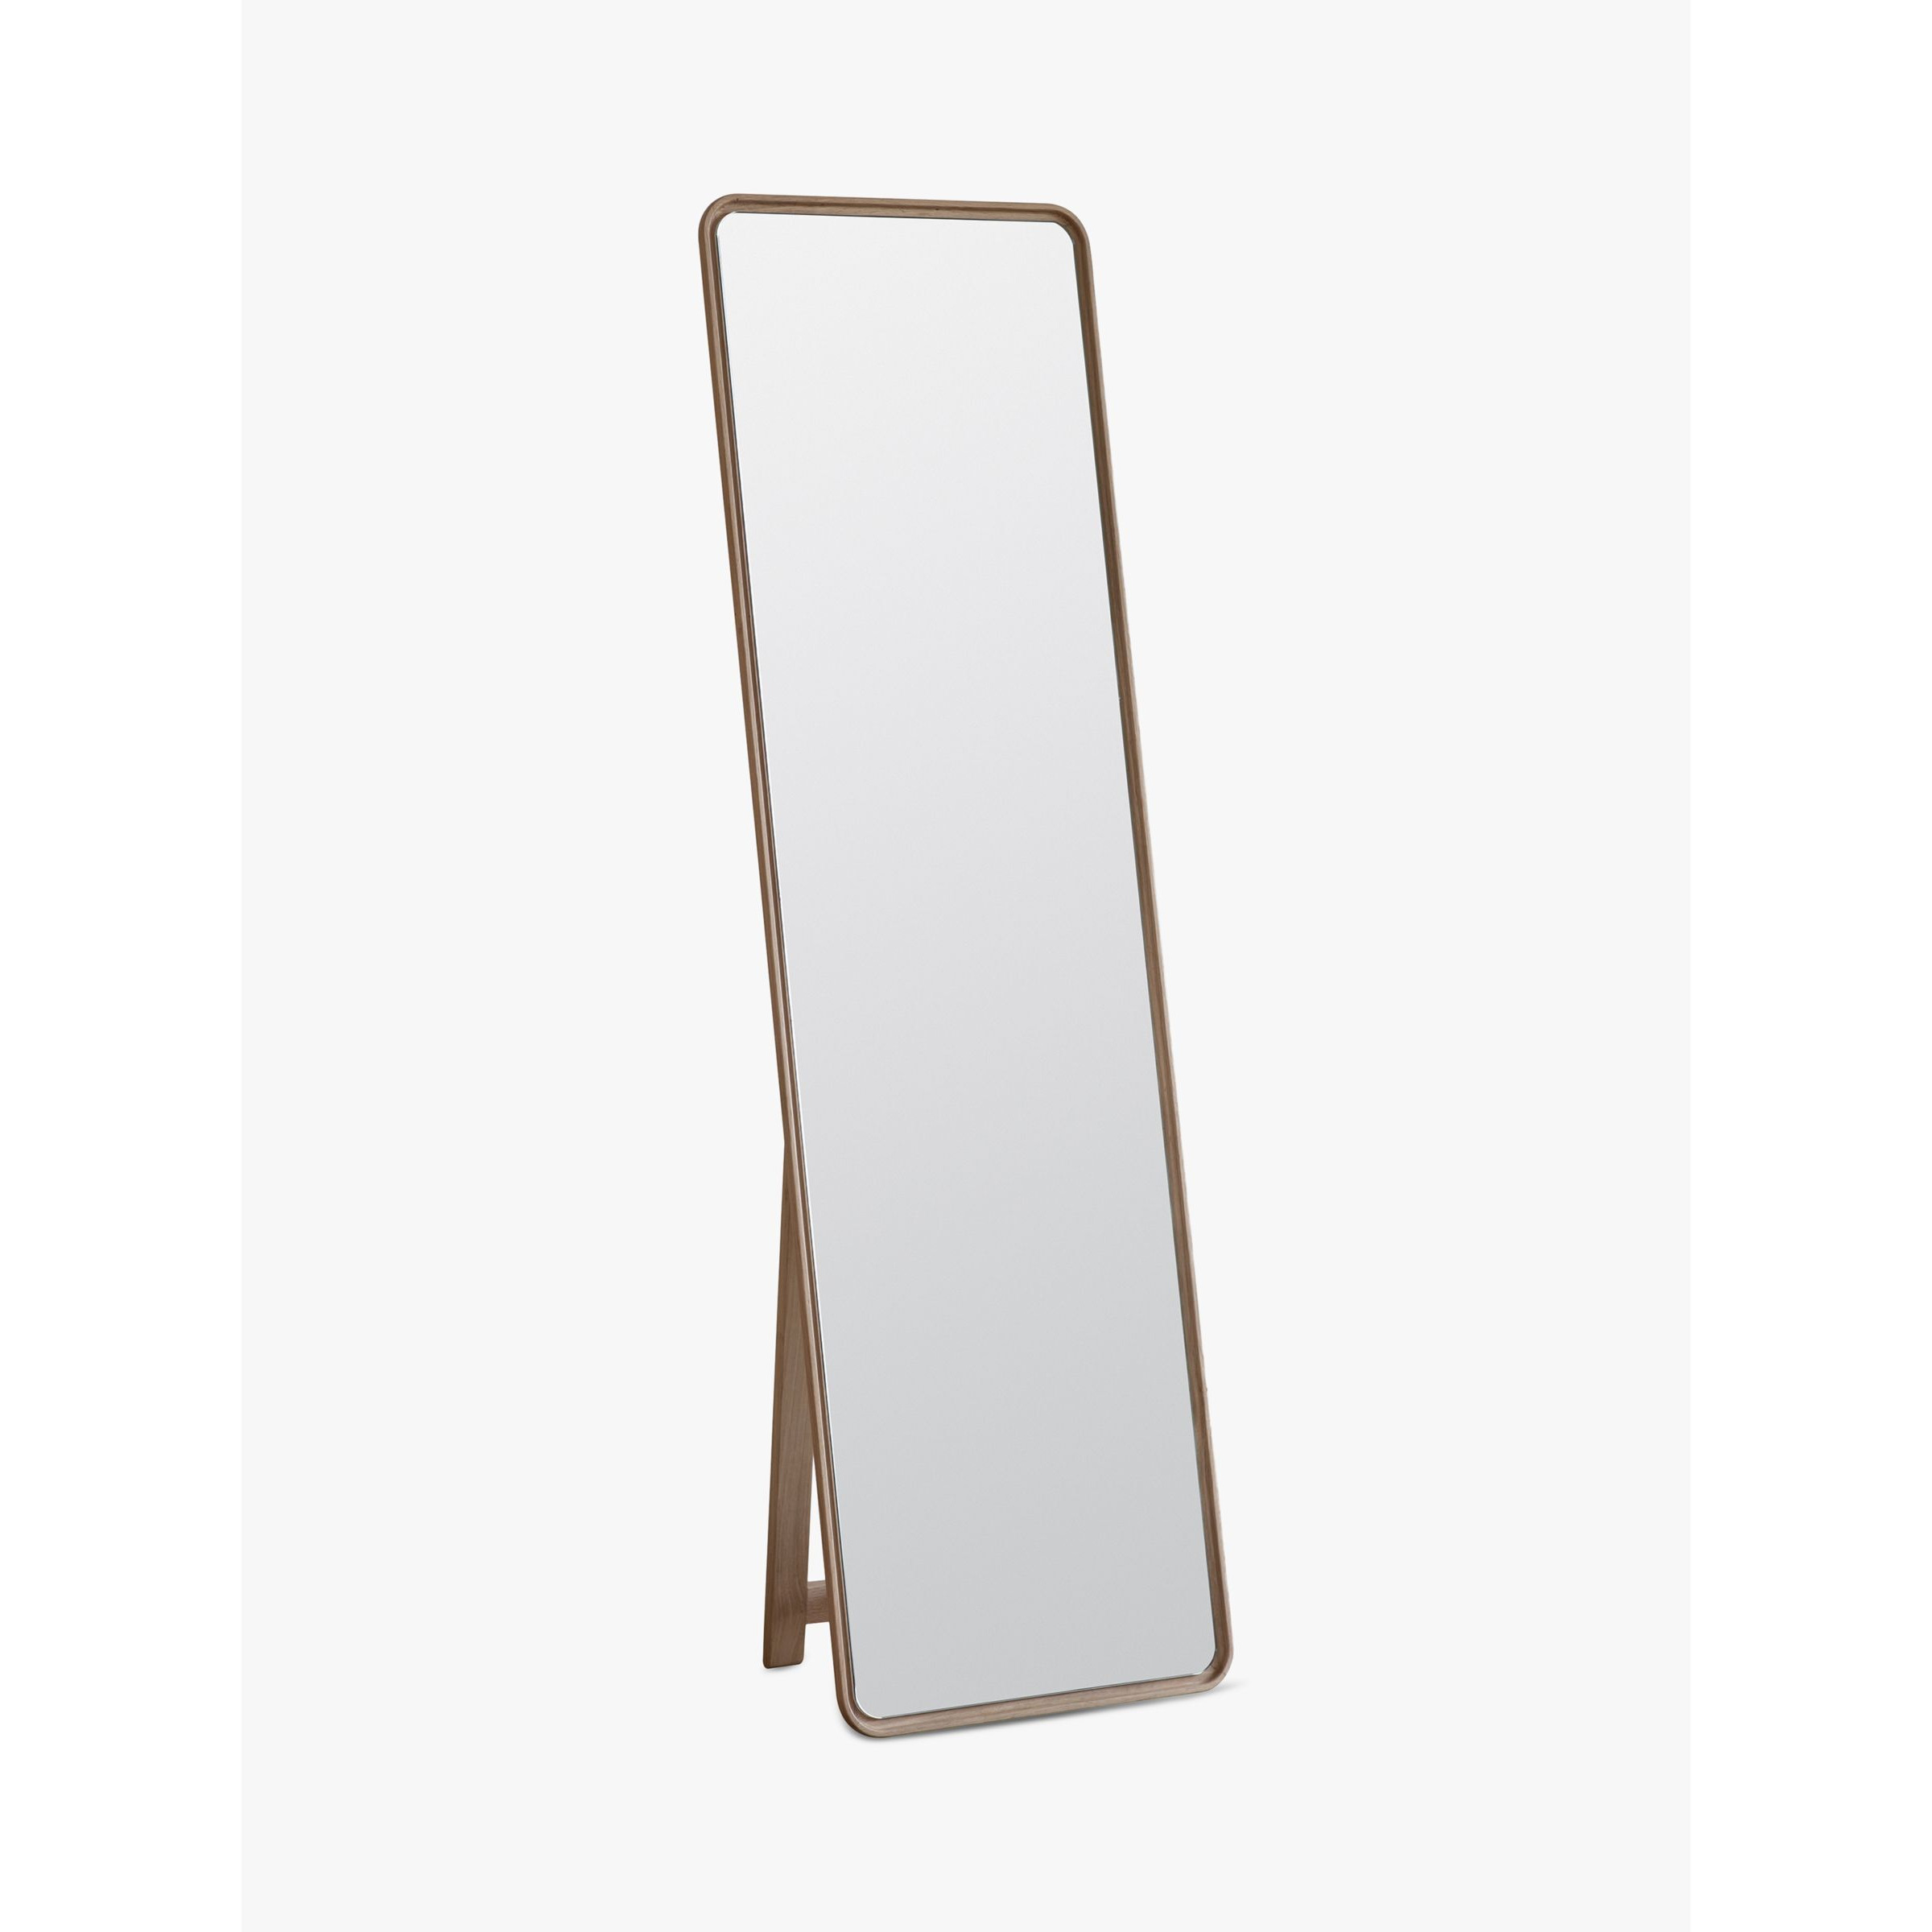 Gallery Direct Kingham Oak Wood Cheval Mirror, 170 x 50cm, Natural - image 1